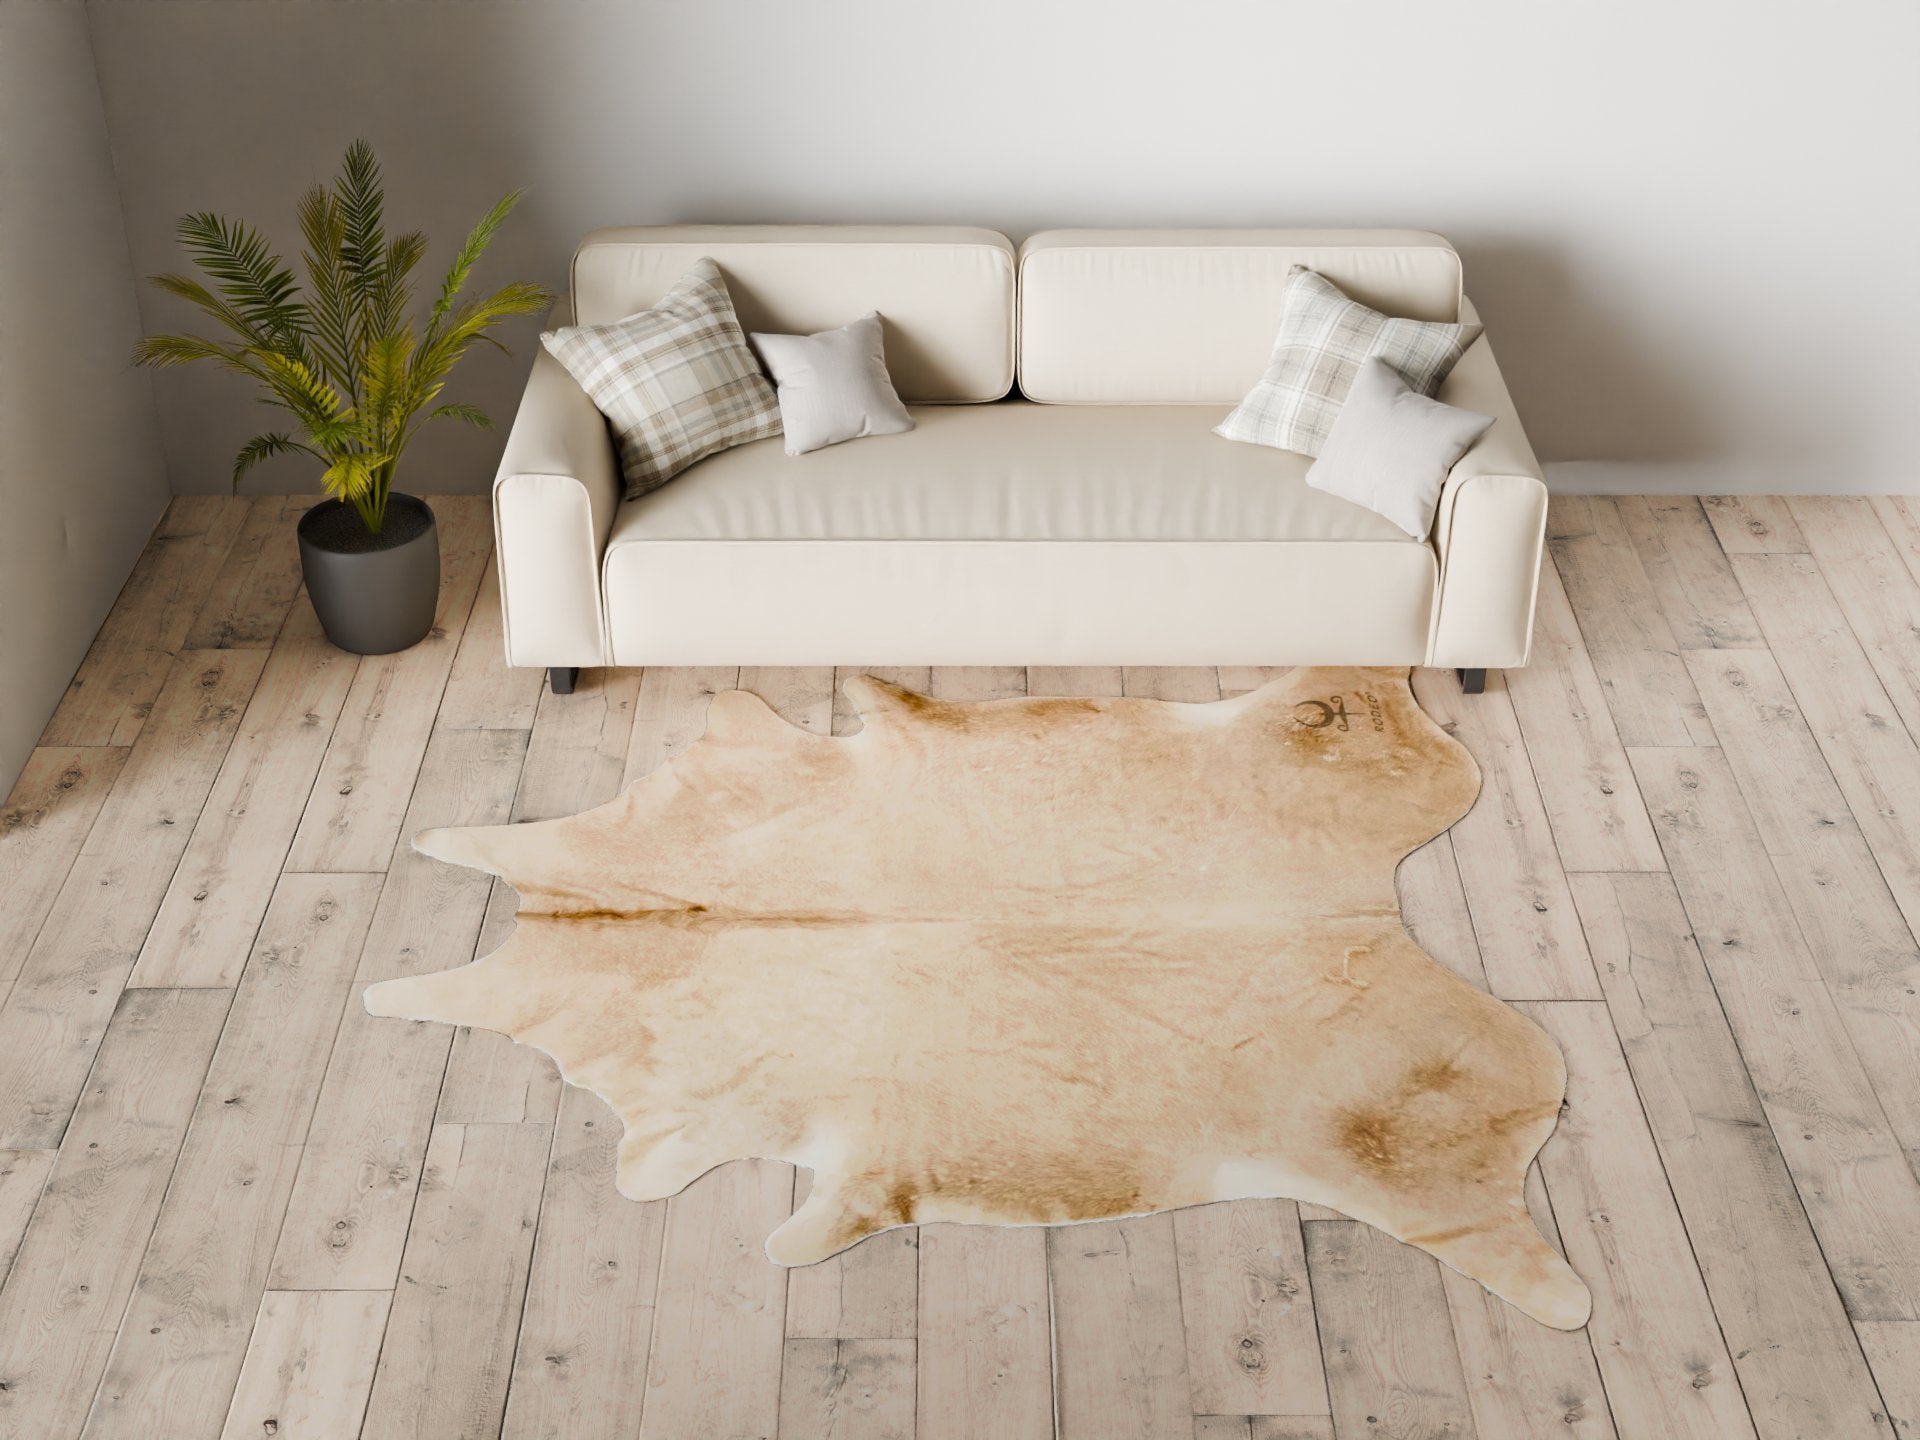 Extra Large Brown Cowhide Rug Size 7.2x 8 ft---4681 - Rodeo Cowhide Rugs